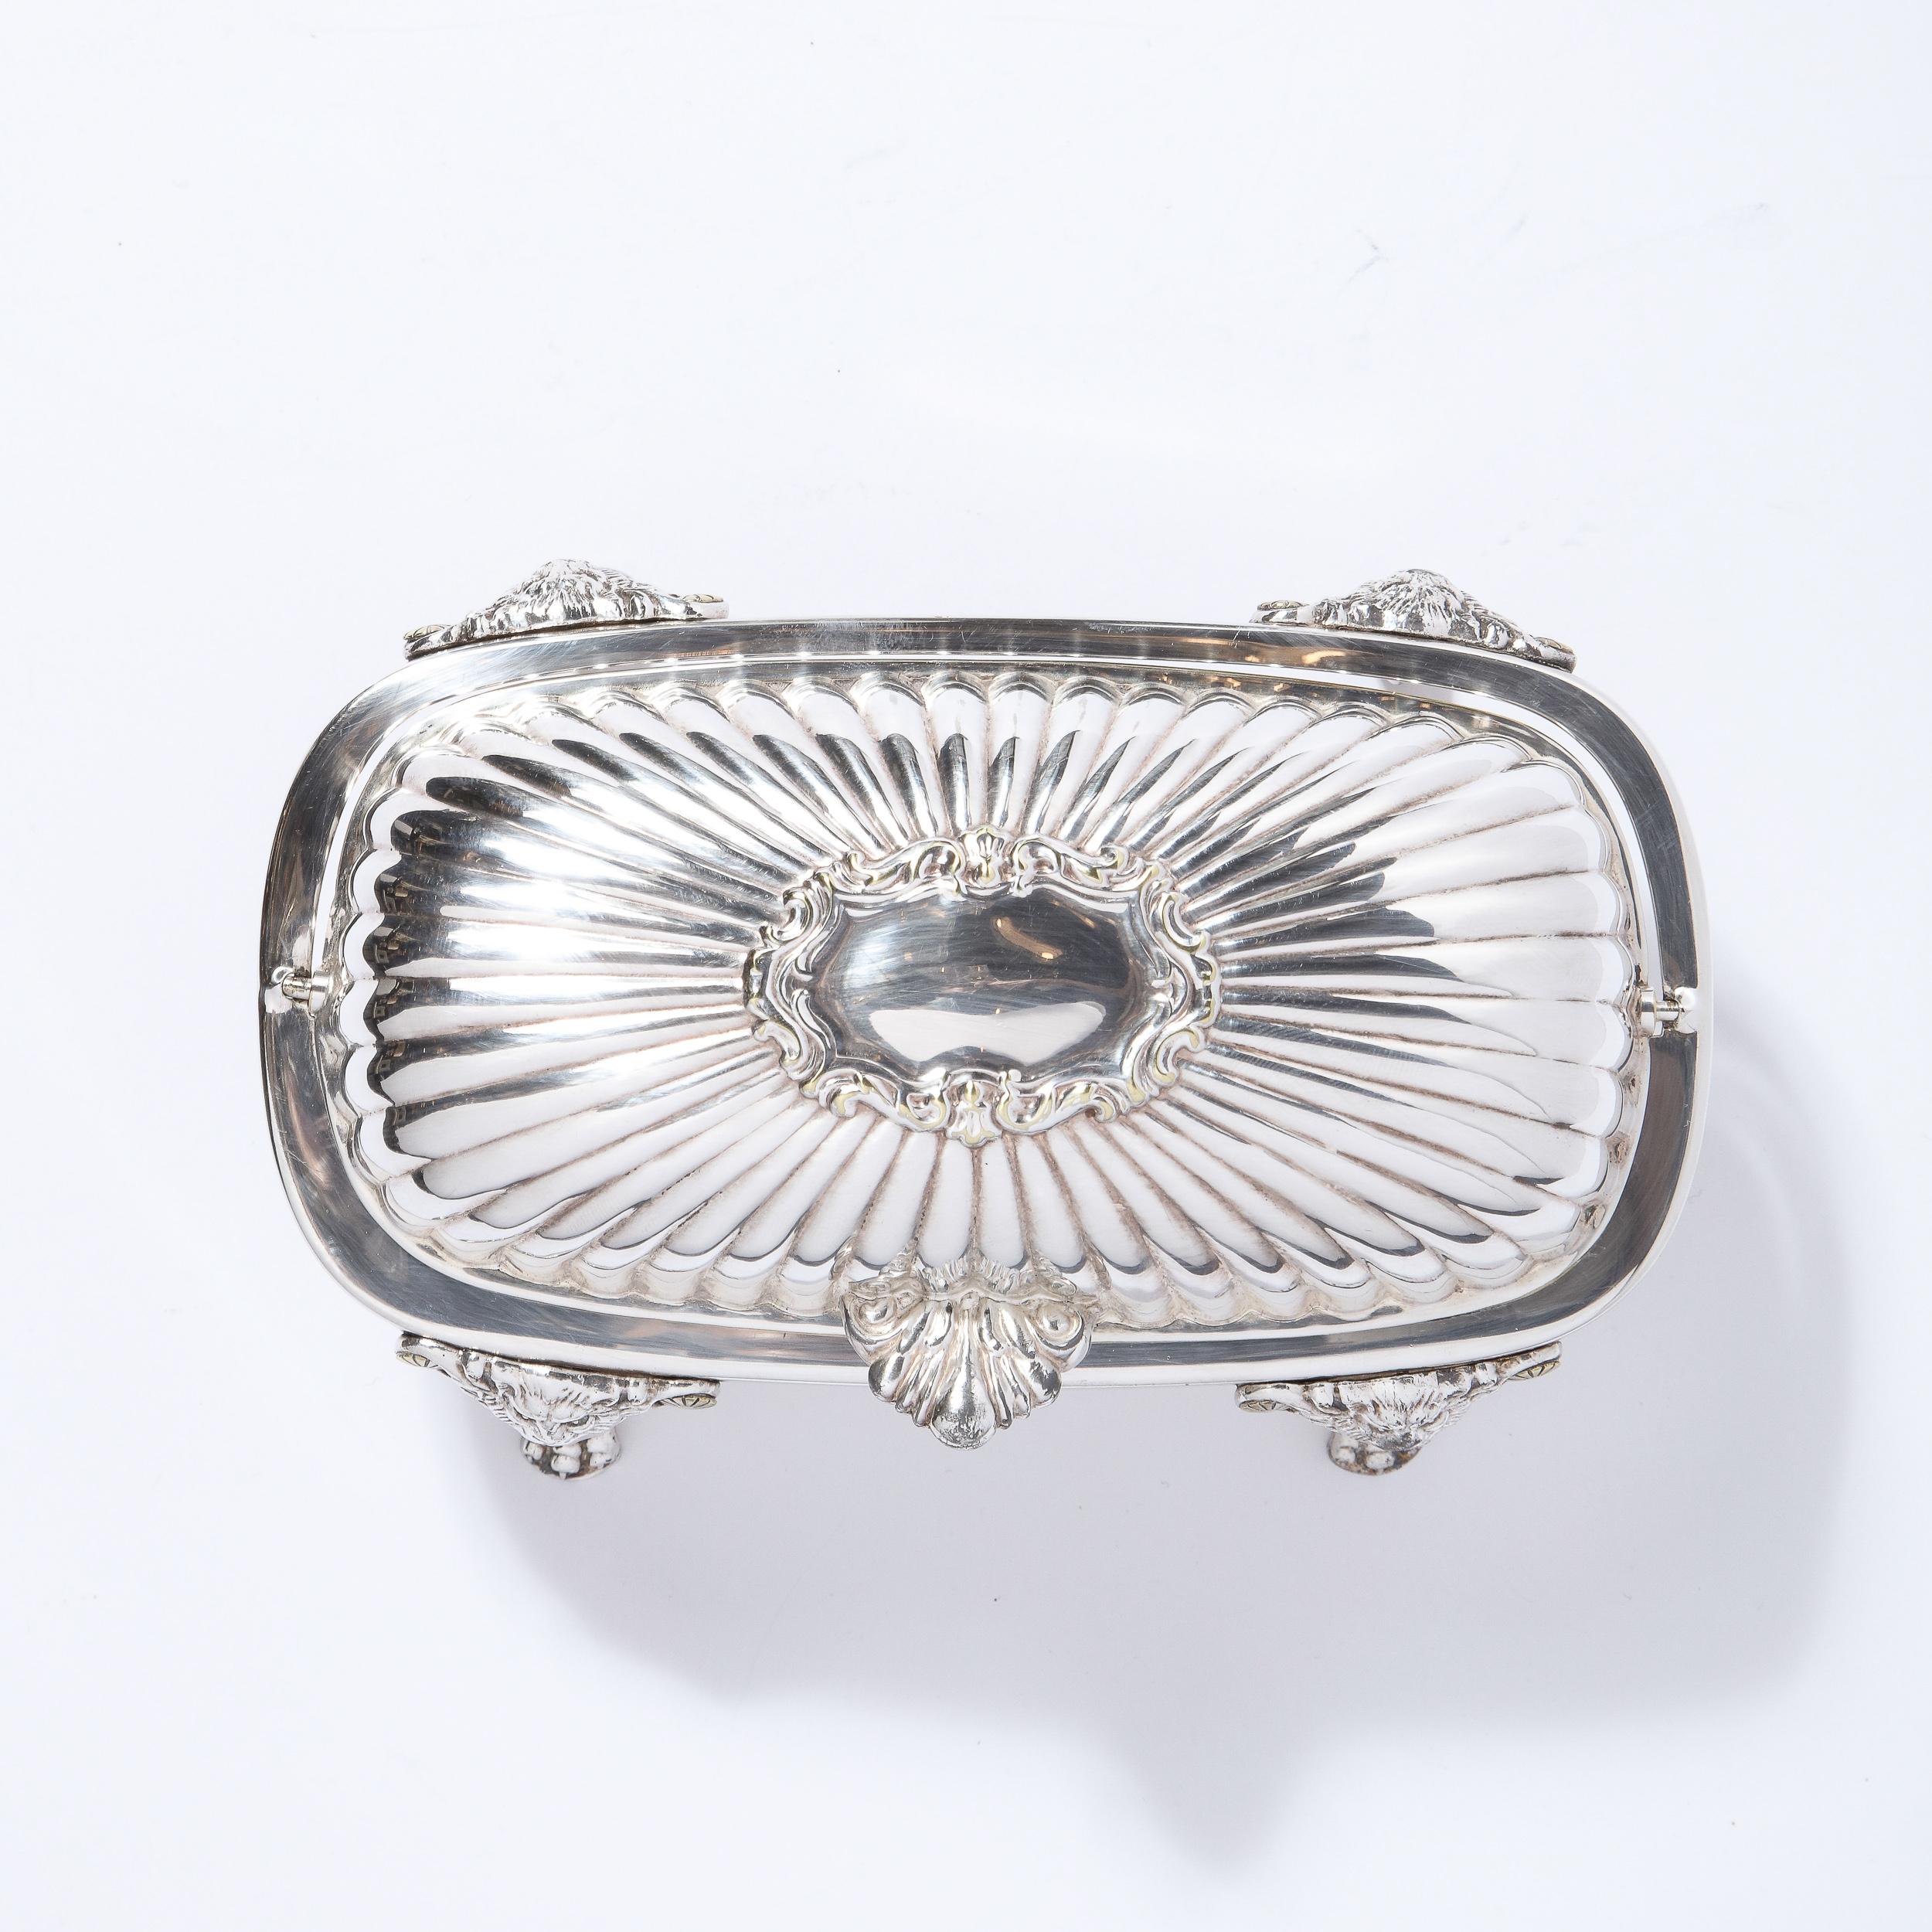 Silver Plate Mid-Century Modern Channeled Neoclassical Style Silverplate Butter Dish